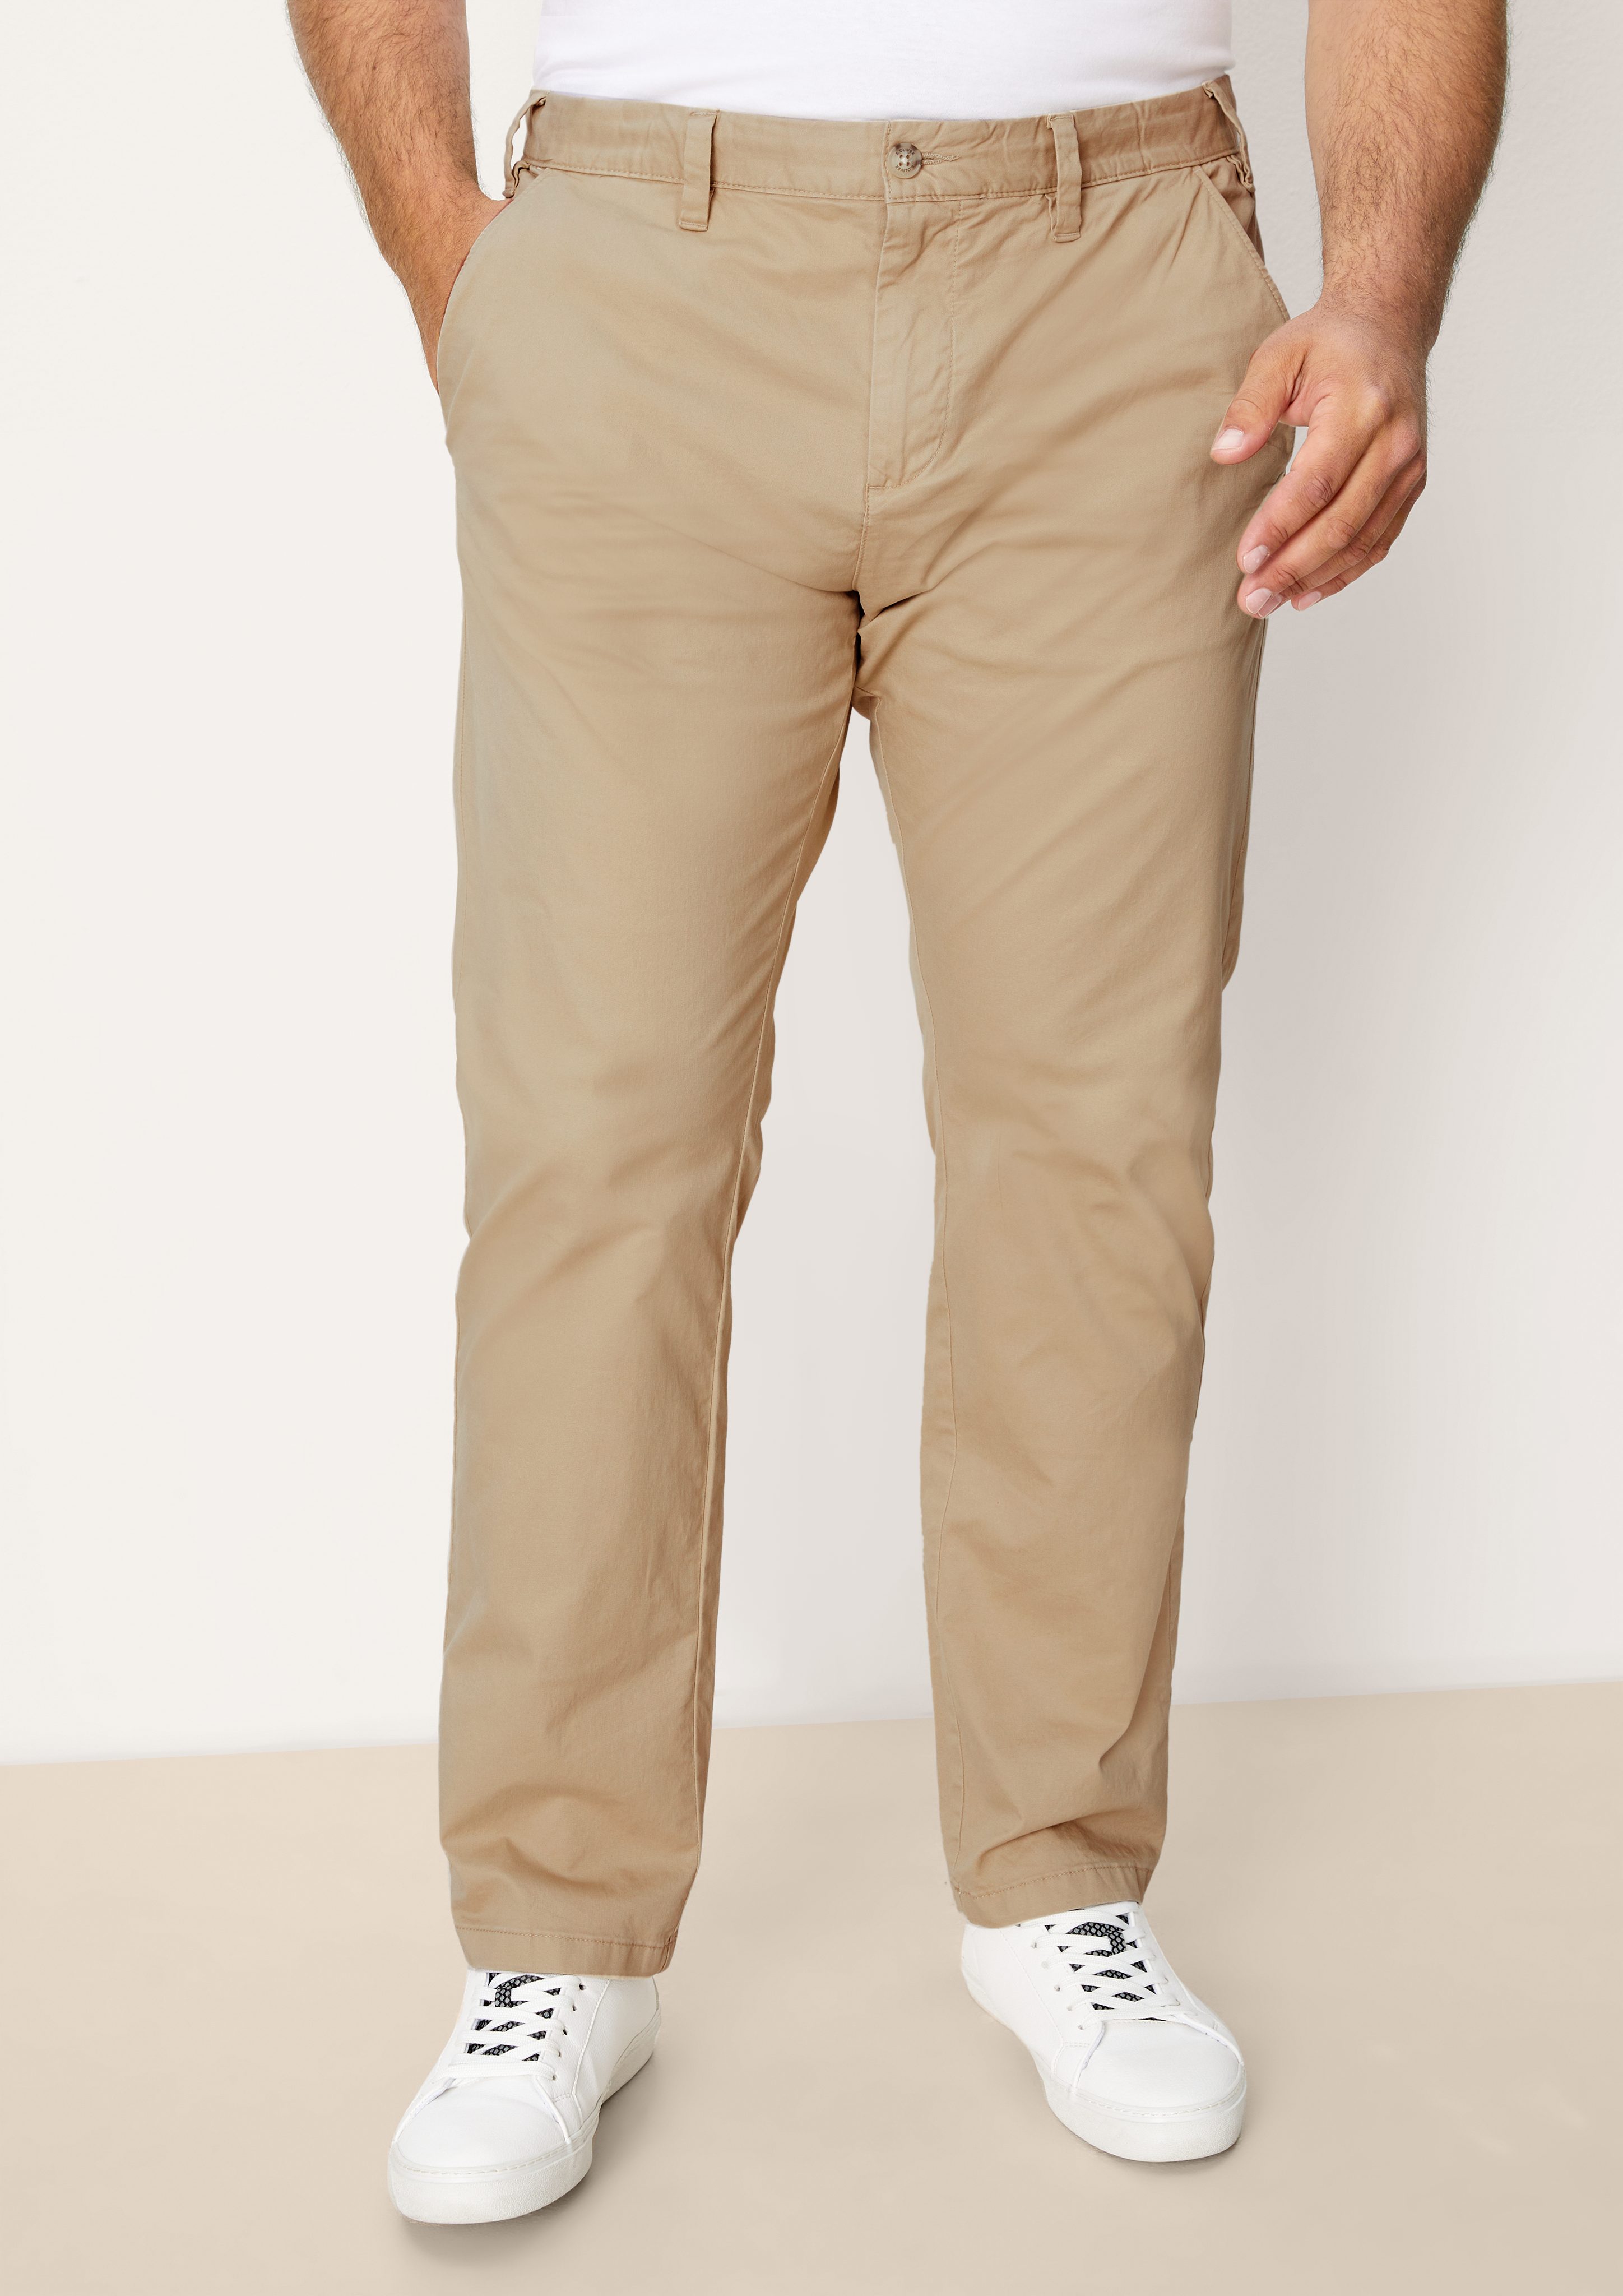 s.Oliver Stoffhose Relaxed: Chino aus Baumwolltwill beige